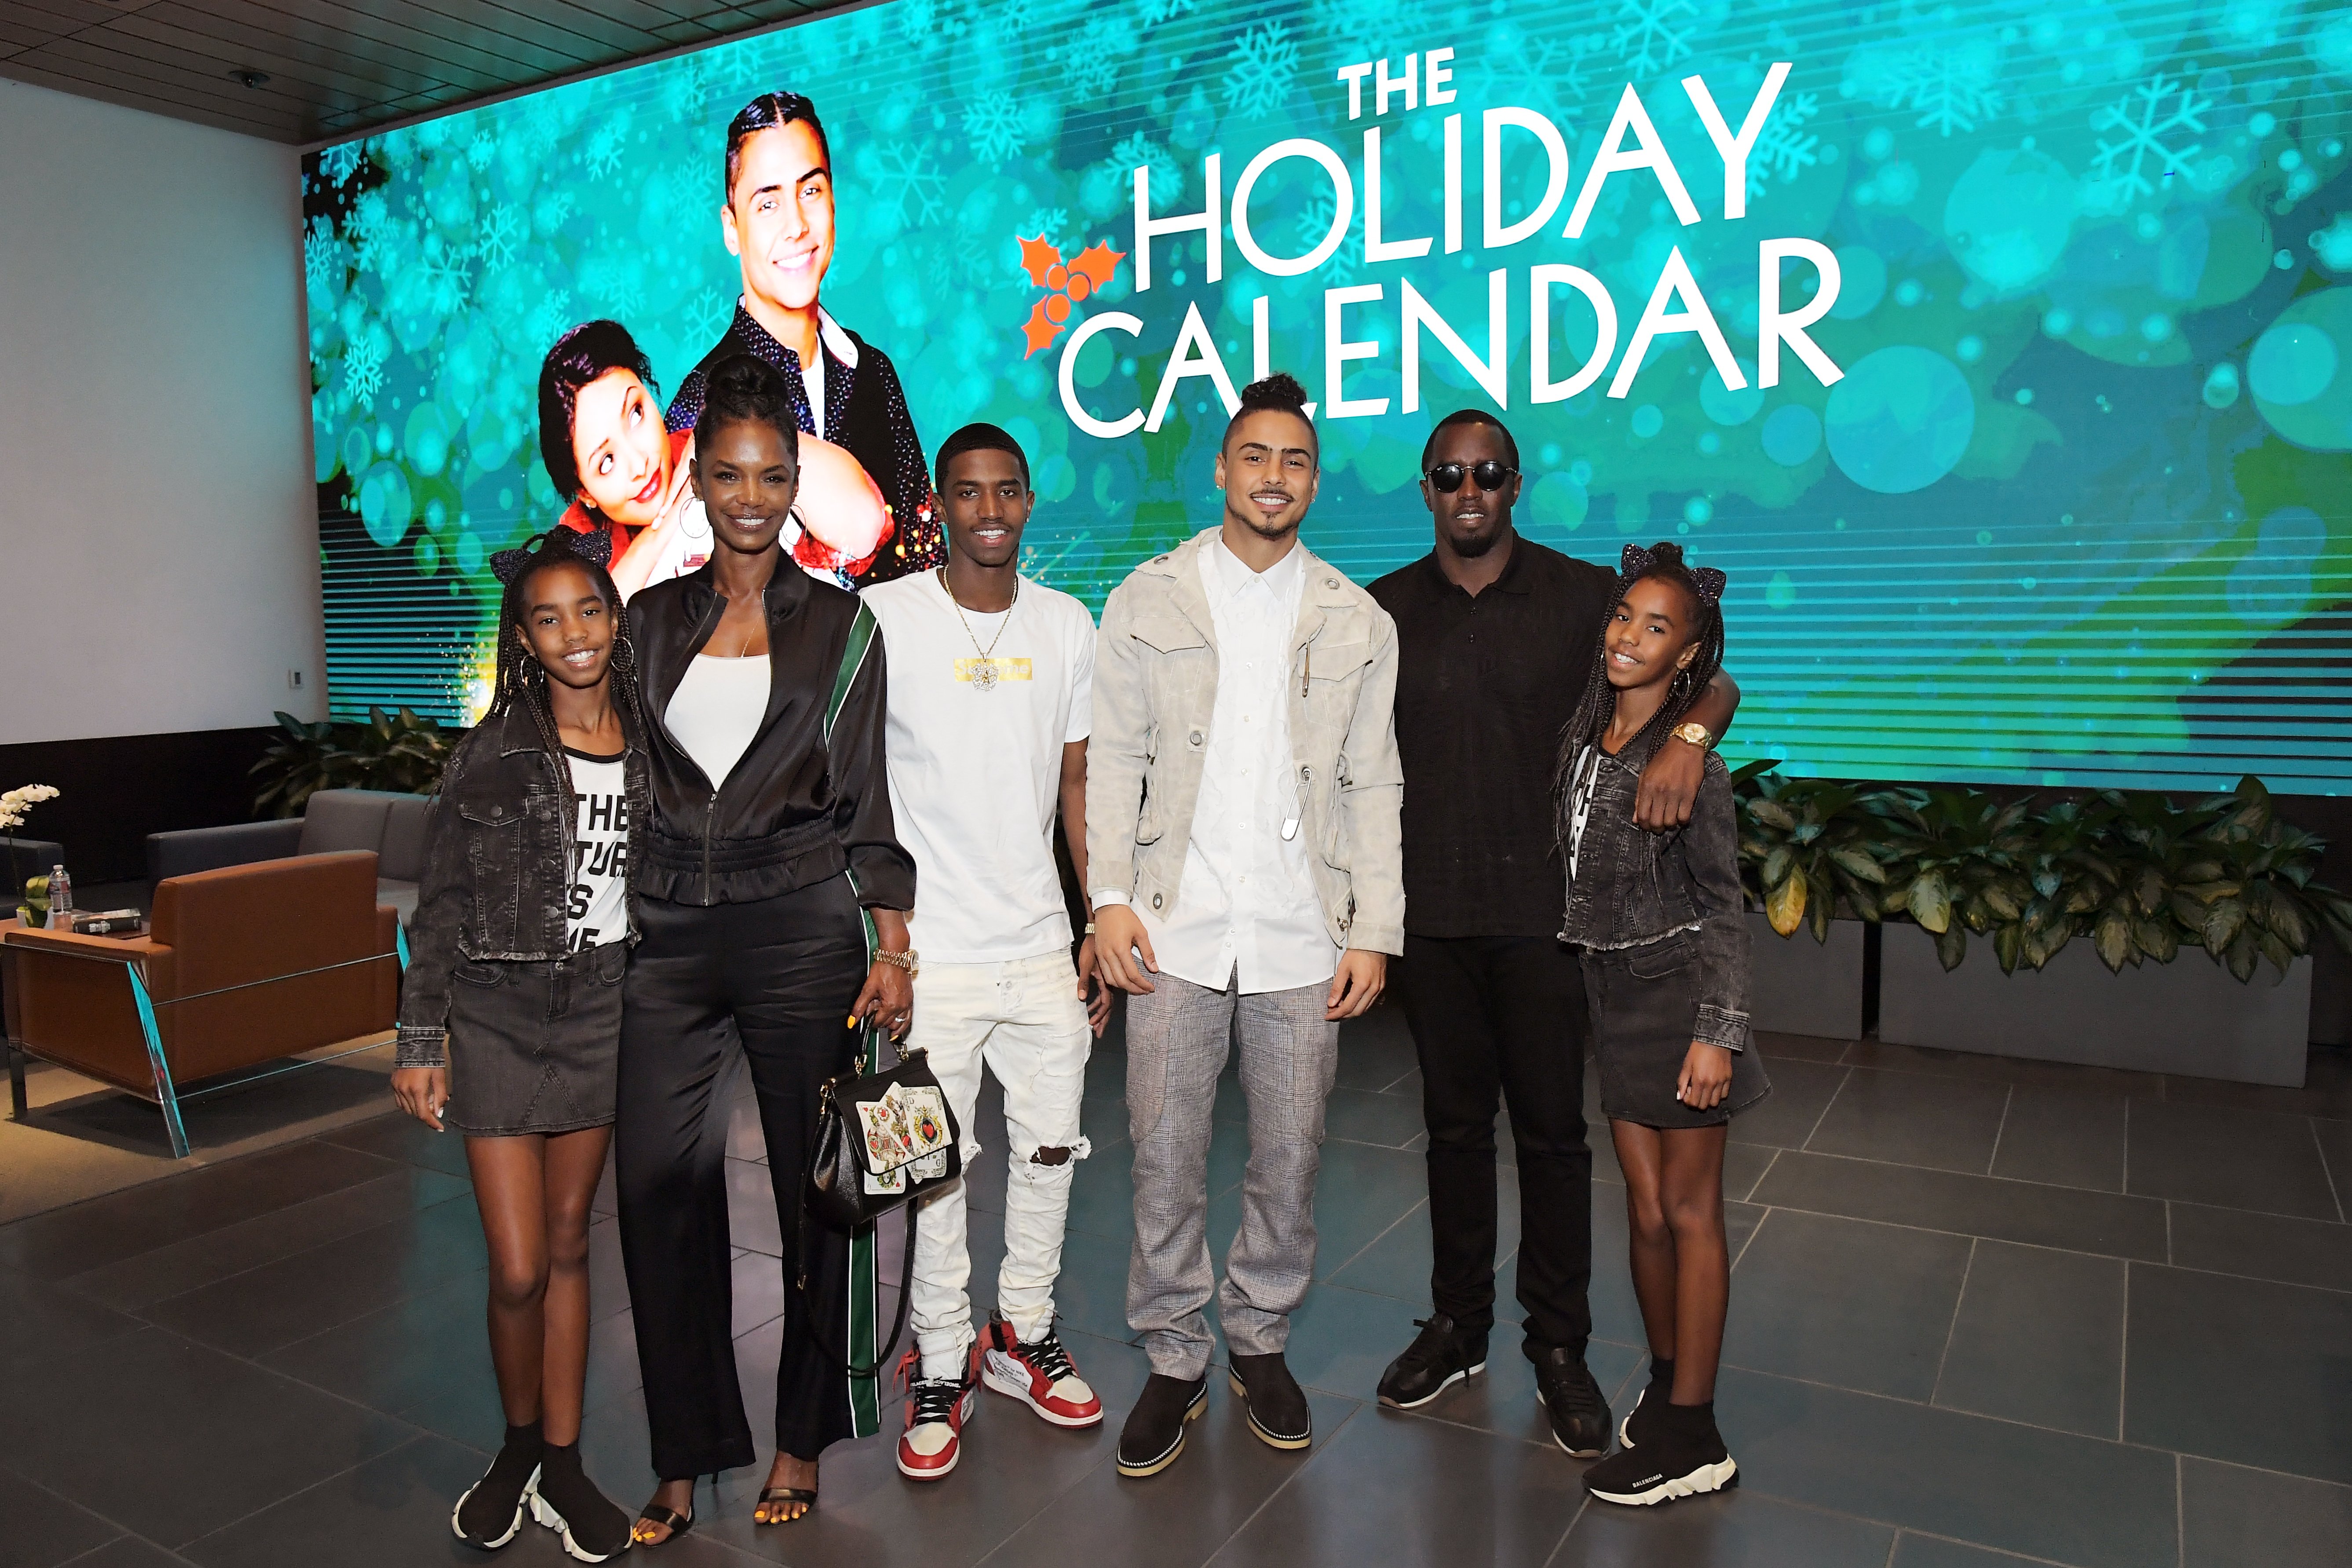  Kim Porter, Christian Casey Combs, Quincy Brown, Sean "Diddy" Combs, D'Lila Star Combs and Jessie James Combs attend "The Holiday Calendar" Special Screening, 2018, Los Angeles, California. | Photo: Getty Images